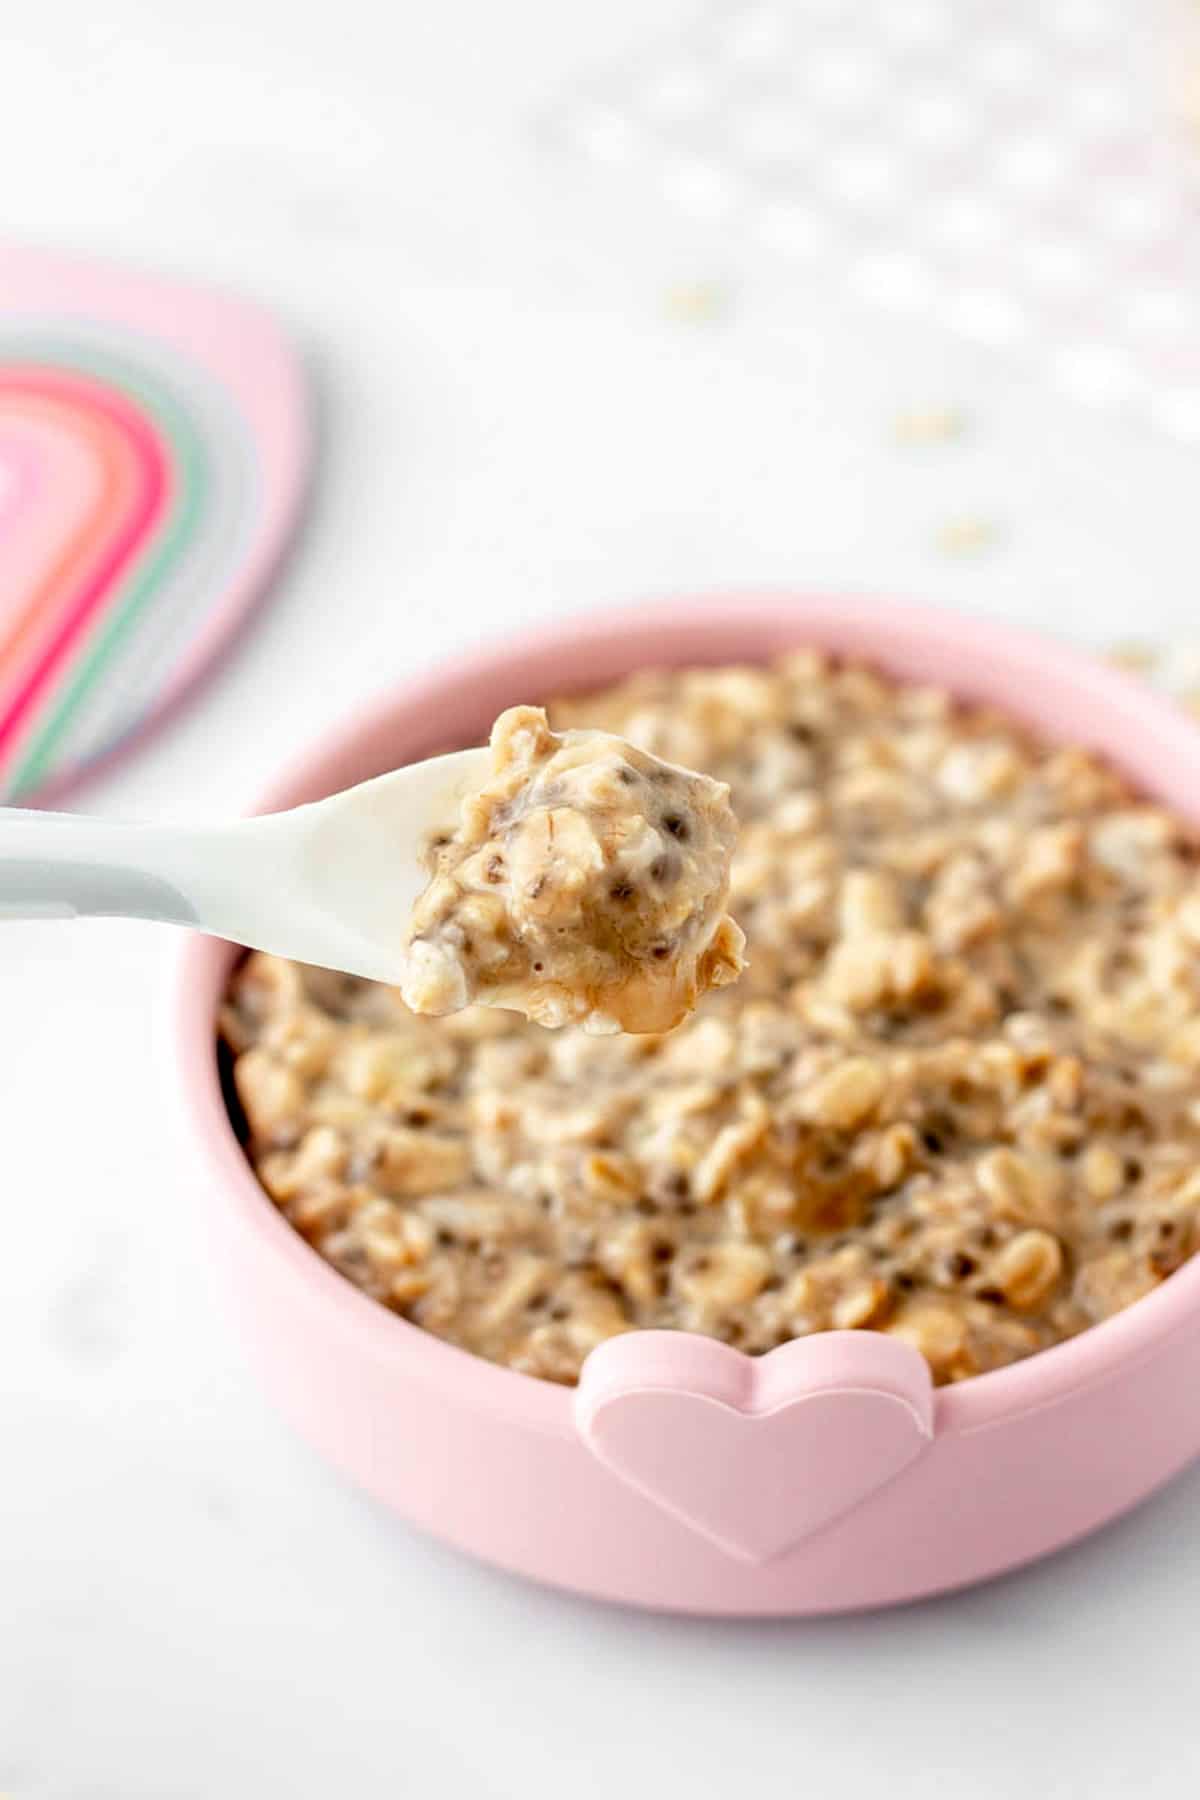 A small spoon holding up some BLW overnight oats.